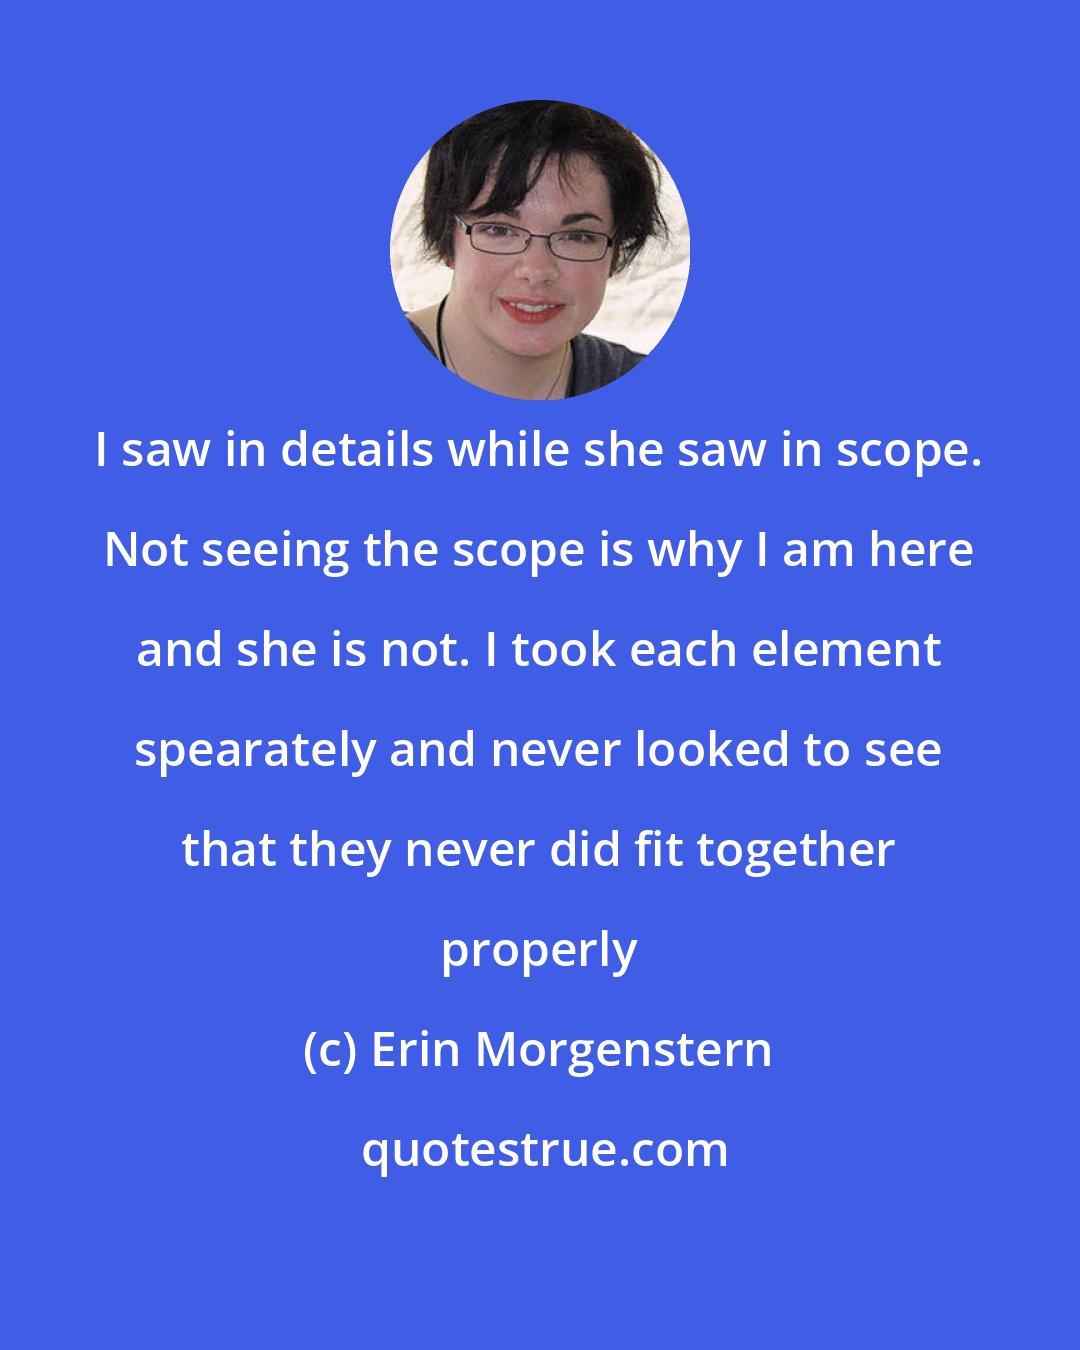 Erin Morgenstern: I saw in details while she saw in scope. Not seeing the scope is why I am here and she is not. I took each element spearately and never looked to see that they never did fit together properly